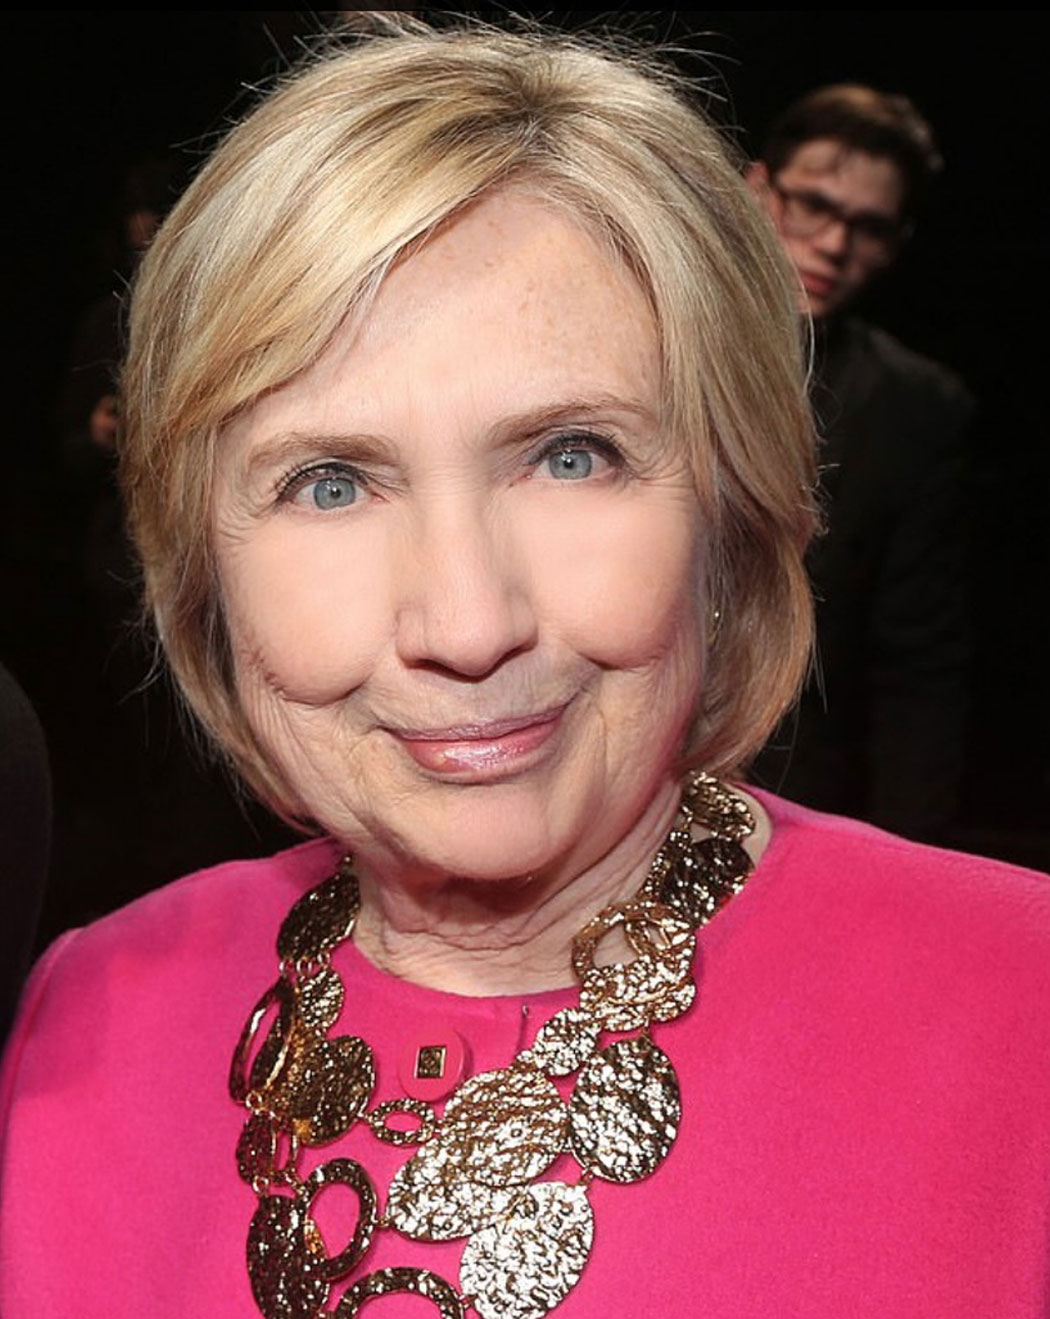 What is the secret of Hillary Clinton's strangely plumped-up-cheeks?